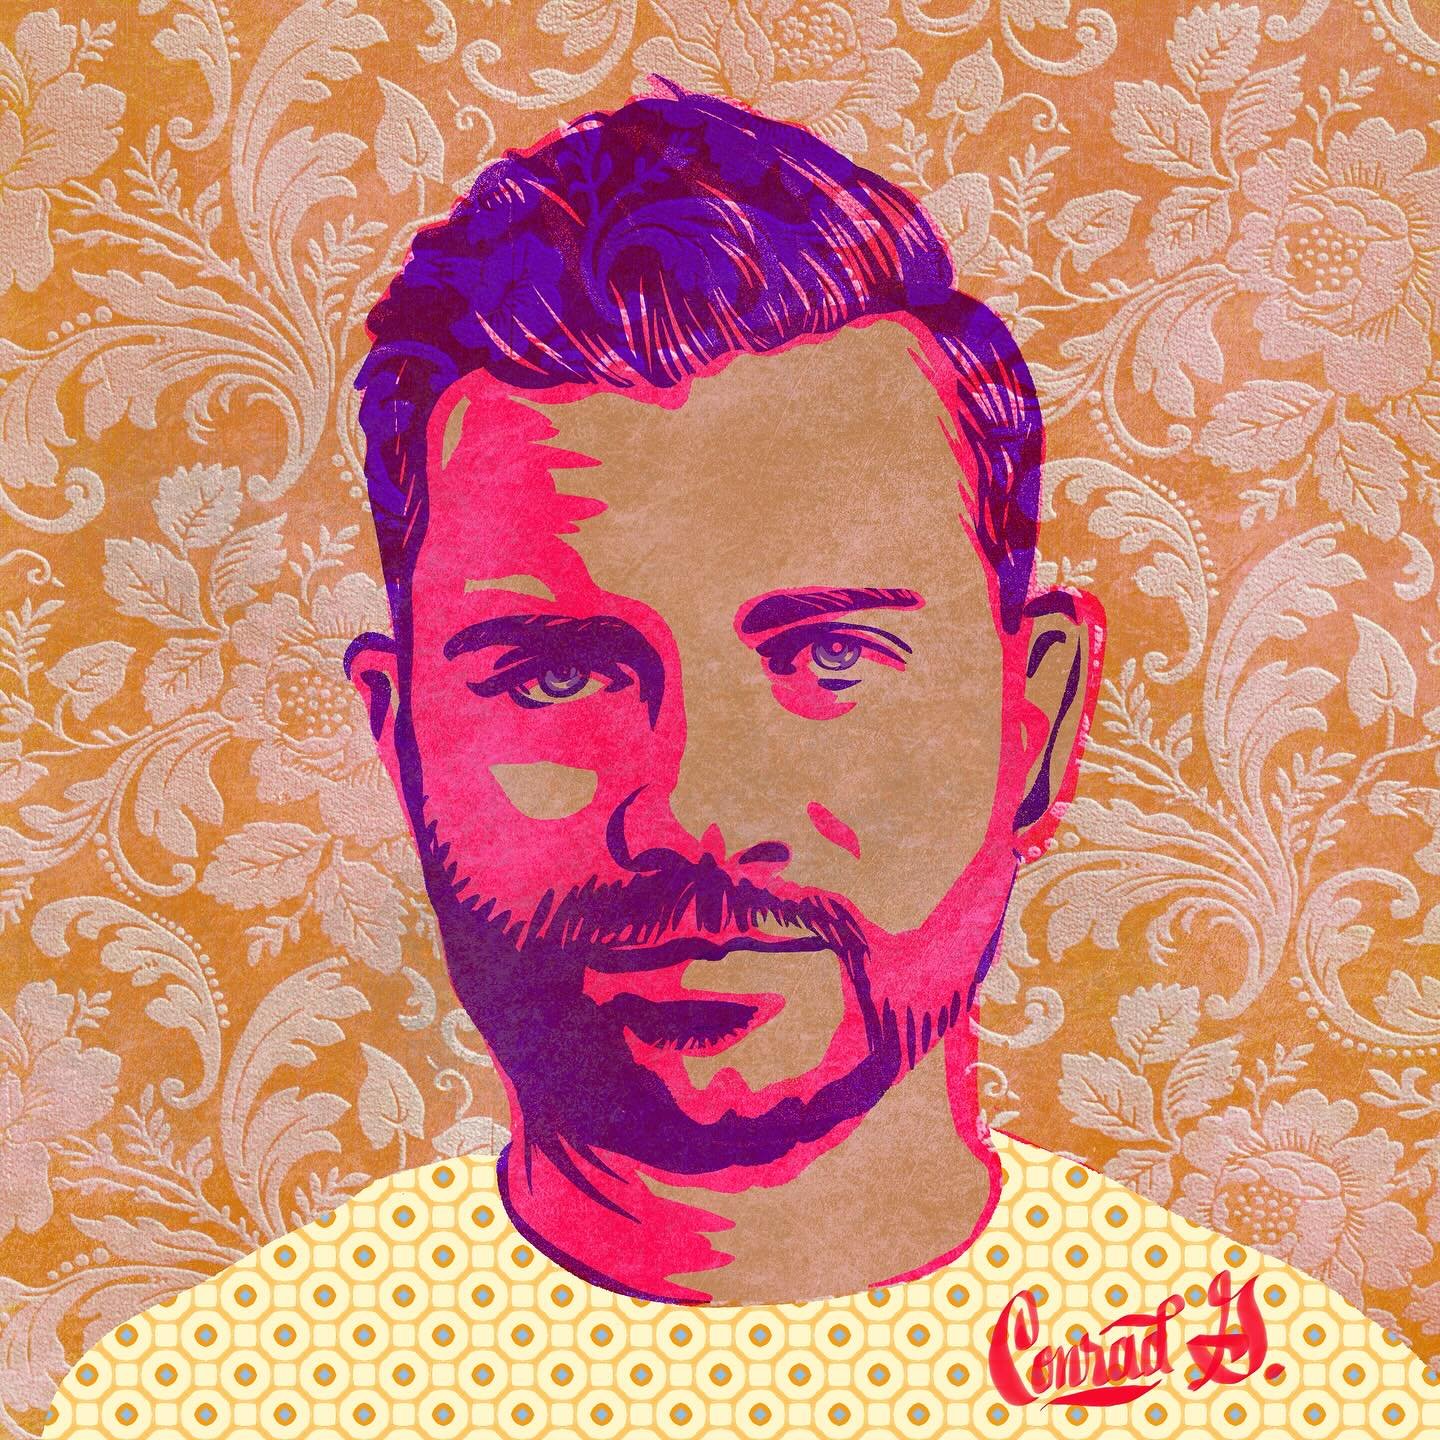 🎨 Embracing the vintage vibes with my latest self-portrait illustration! 👨&zwj;🎨✨ Channeling nostalgia with textured details and classic colors. 🌟 #VintageArt #SelfPortrait #IllustrationInspiration #Illustration #Art #Drawing #Sketch #Illustrator